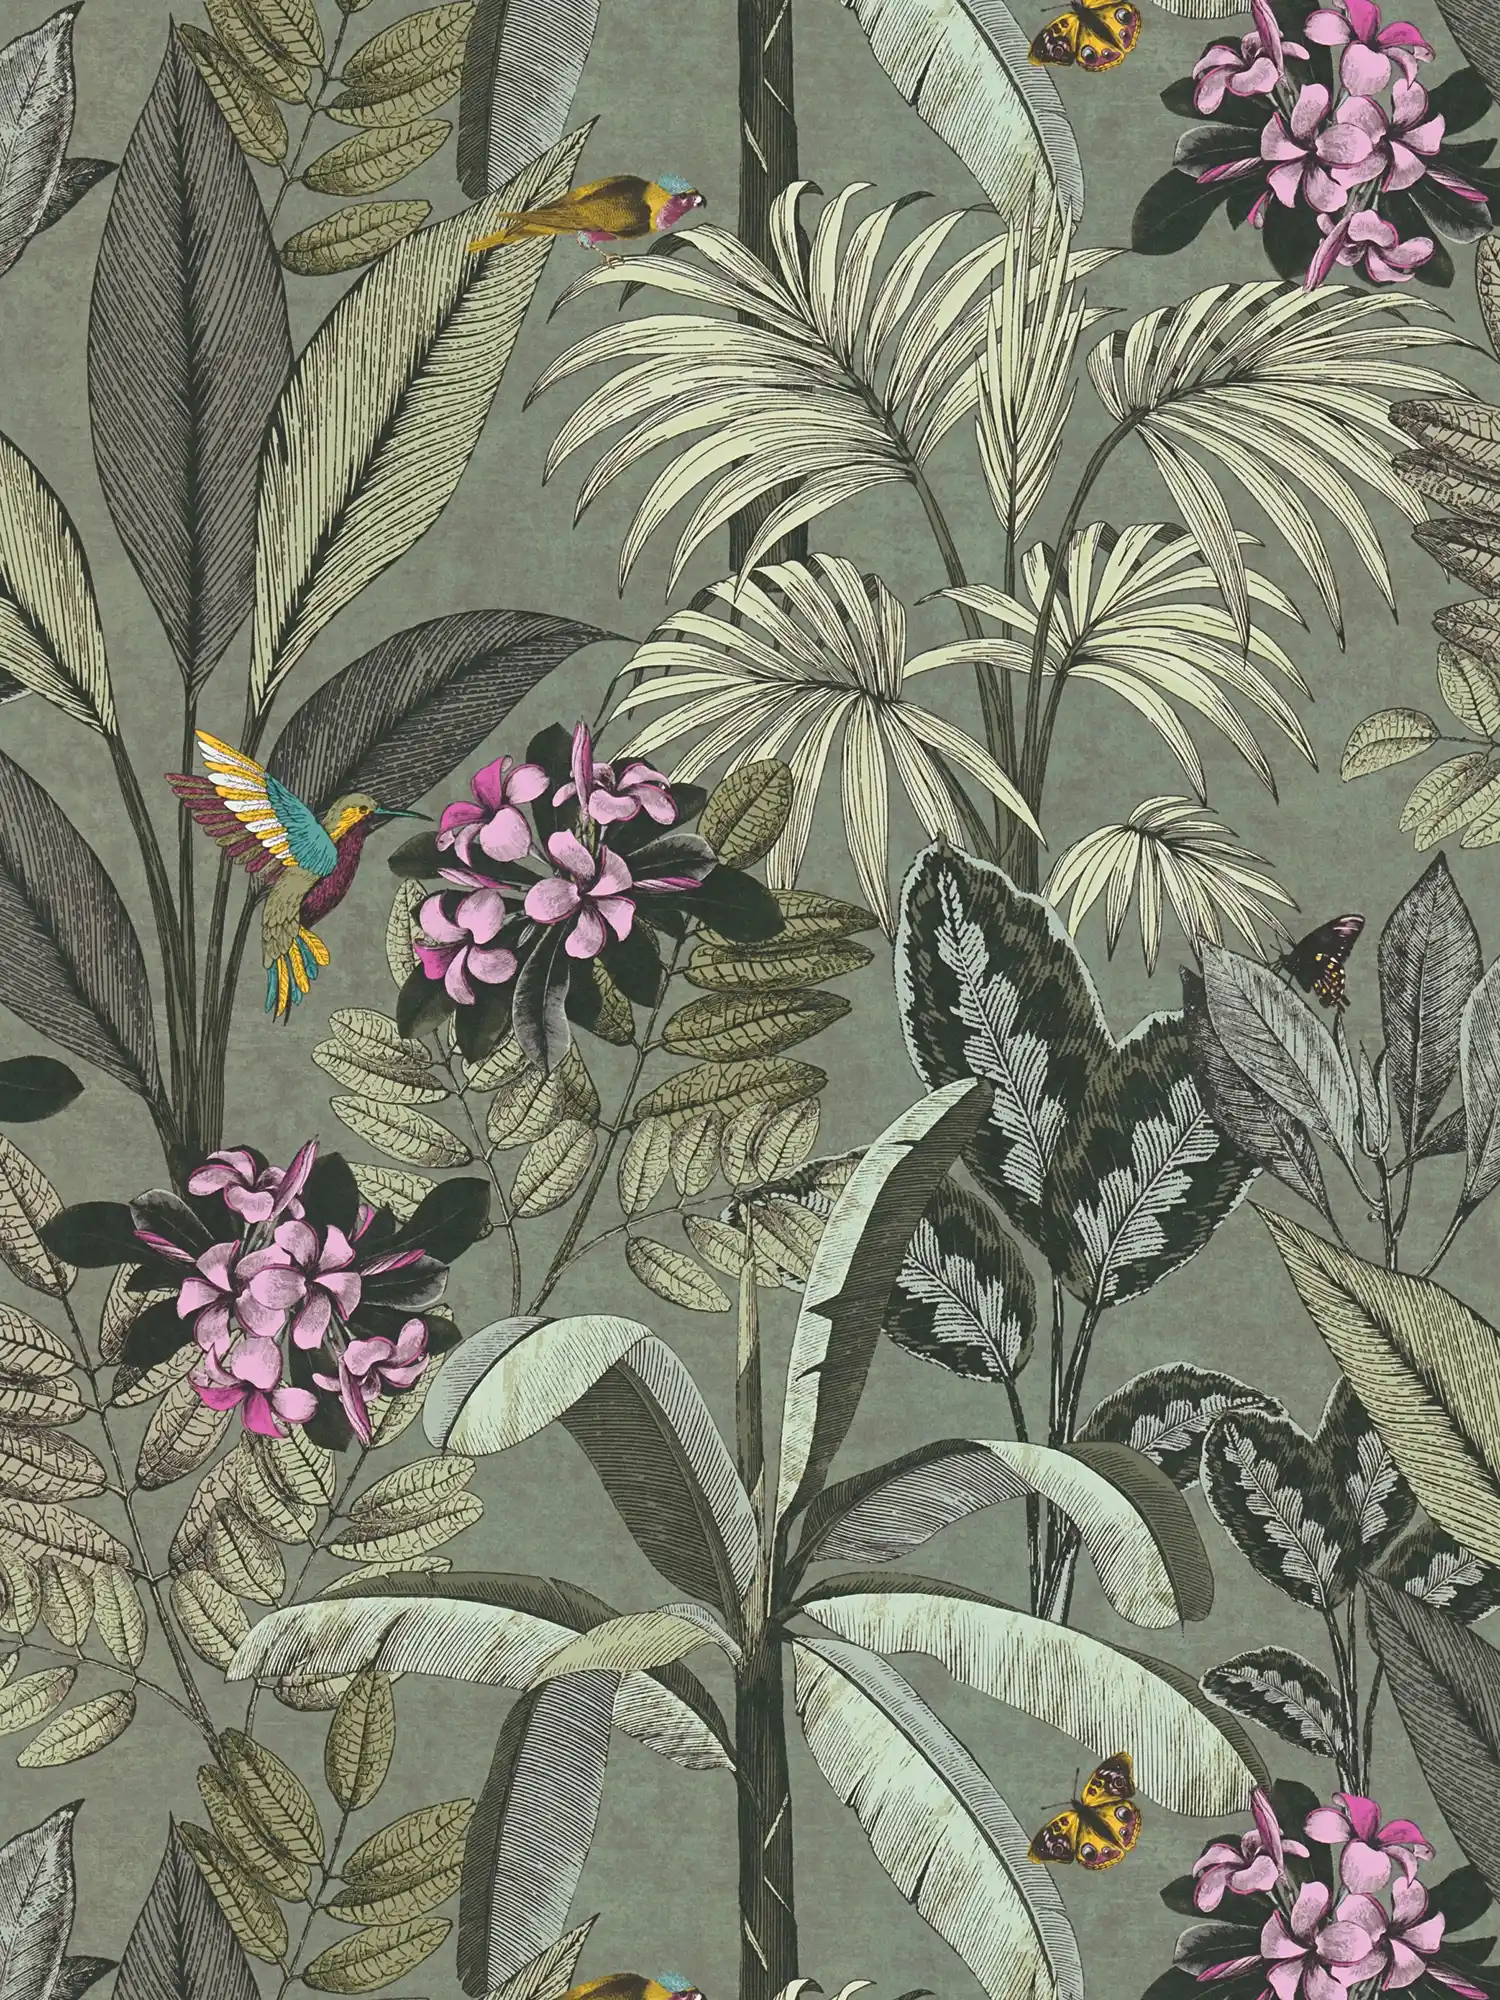 Jungle wallpaper leaves, flowers and birds - grey, green
